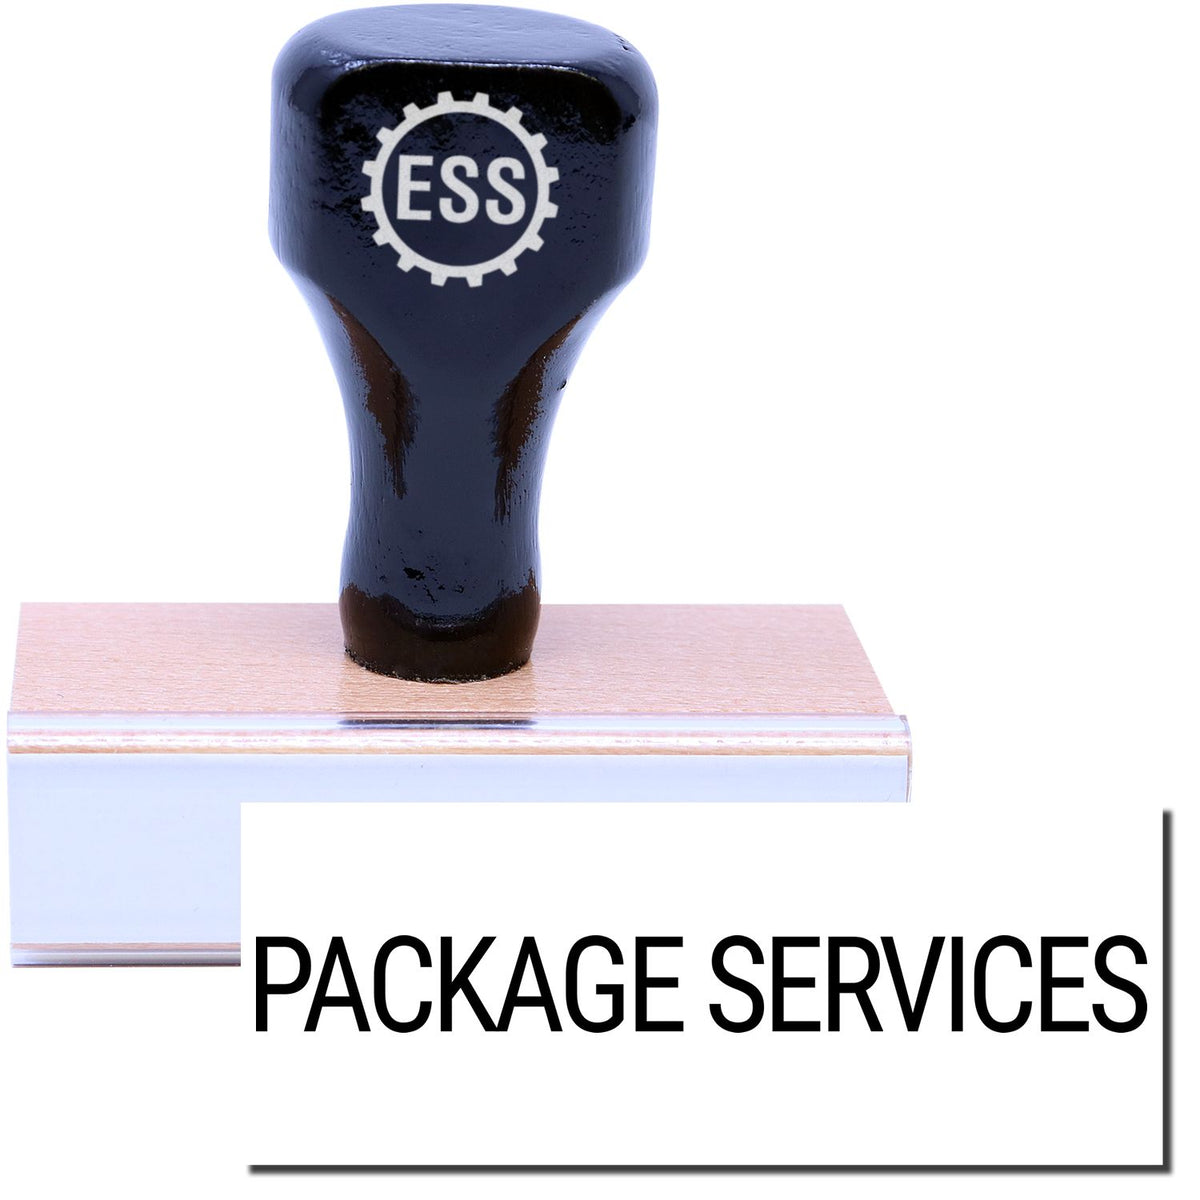 A stock office rubber stamp with a stamped image showing how the text &quot;PACKAGE SERVICES&quot; in a large font is displayed after stamping.